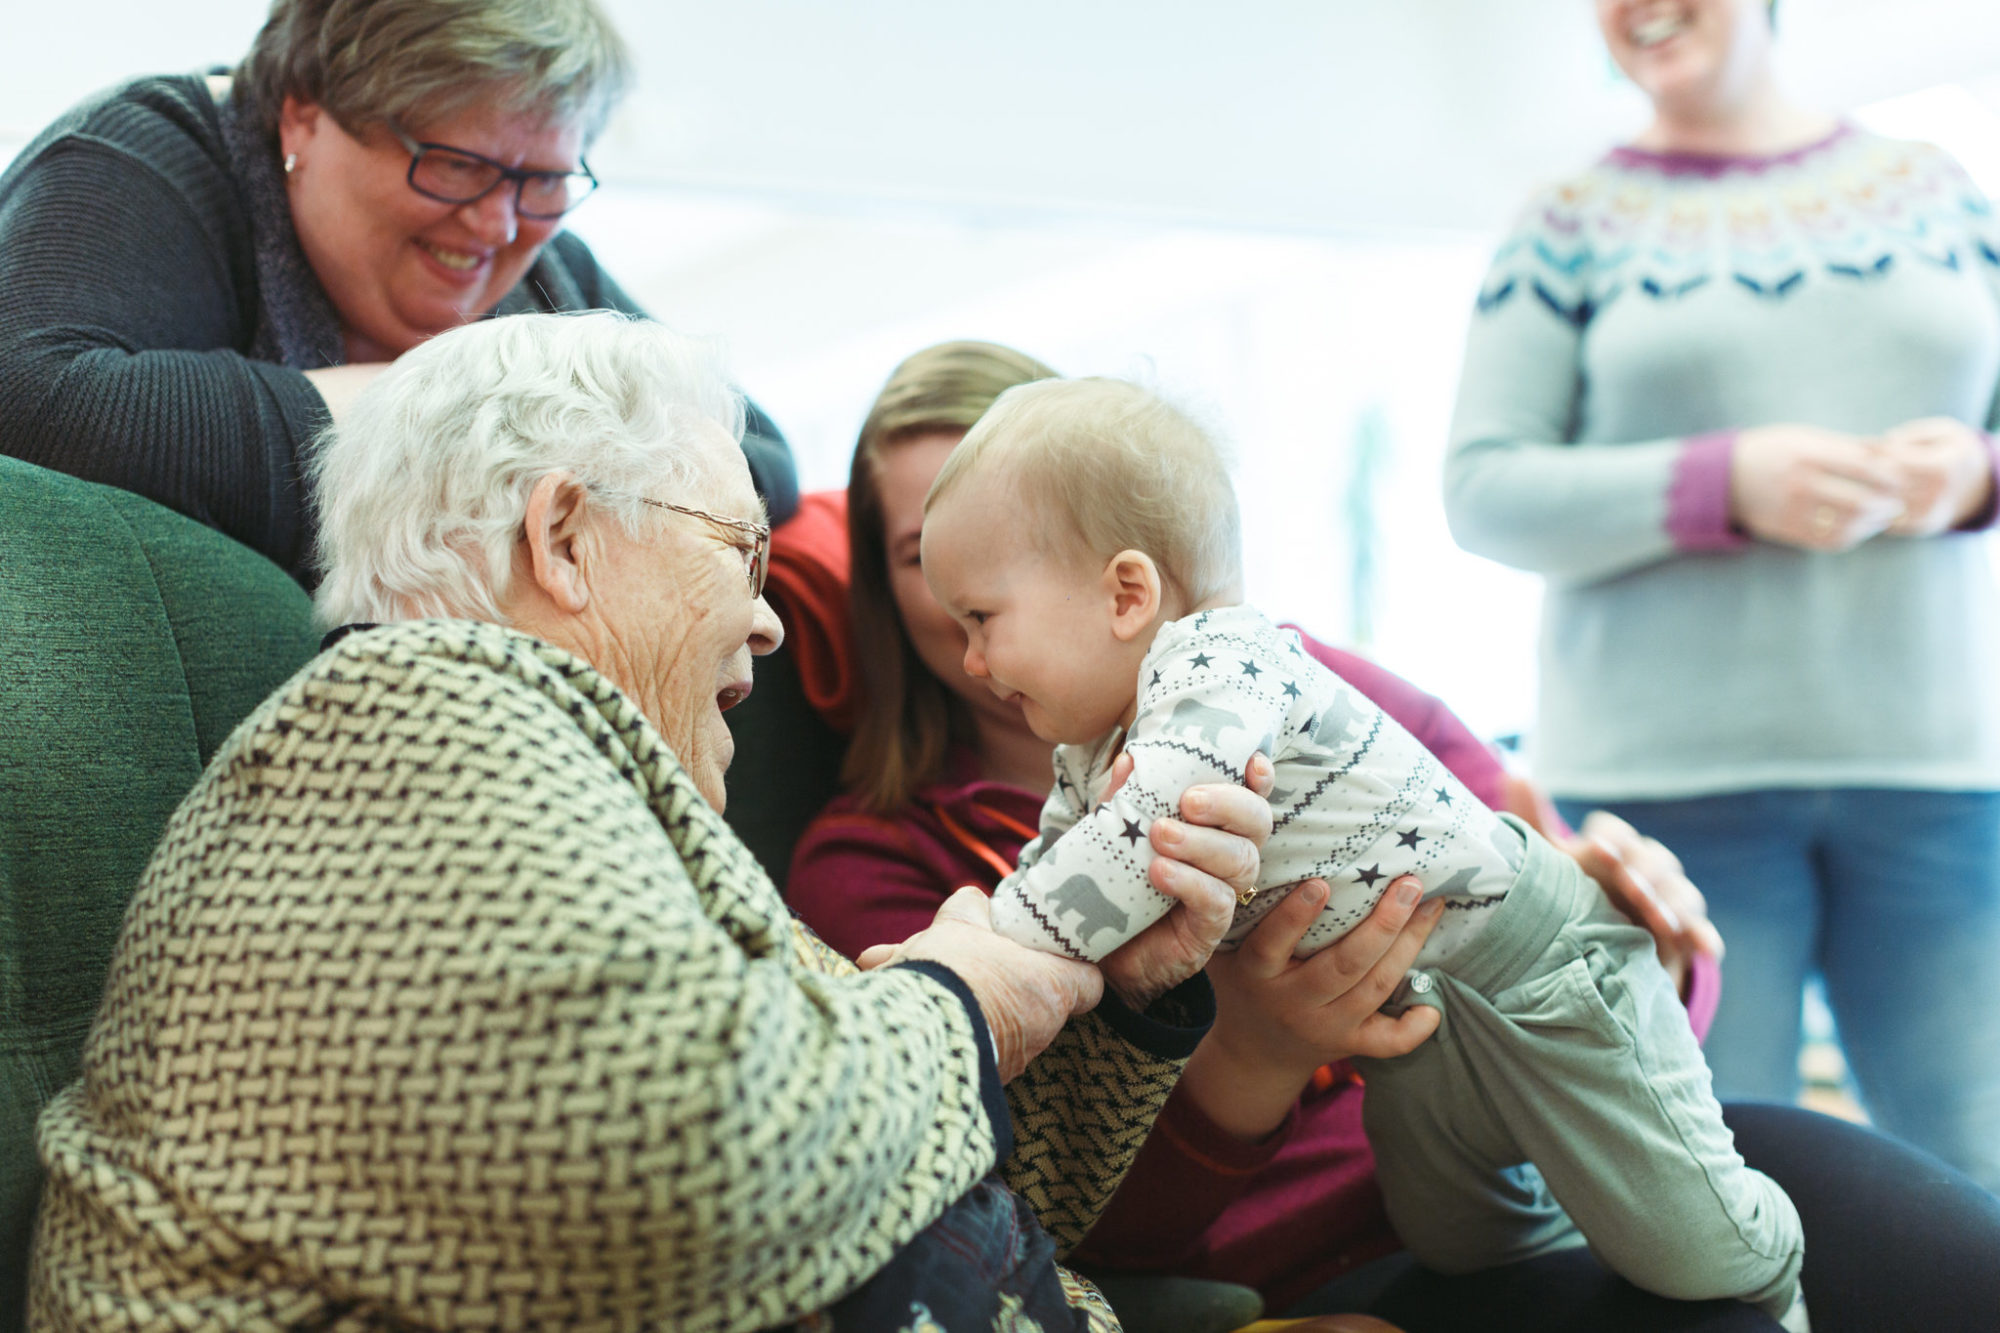 visit baby levanger National Center for culture, health and care.  Photo: Thomas Jergel